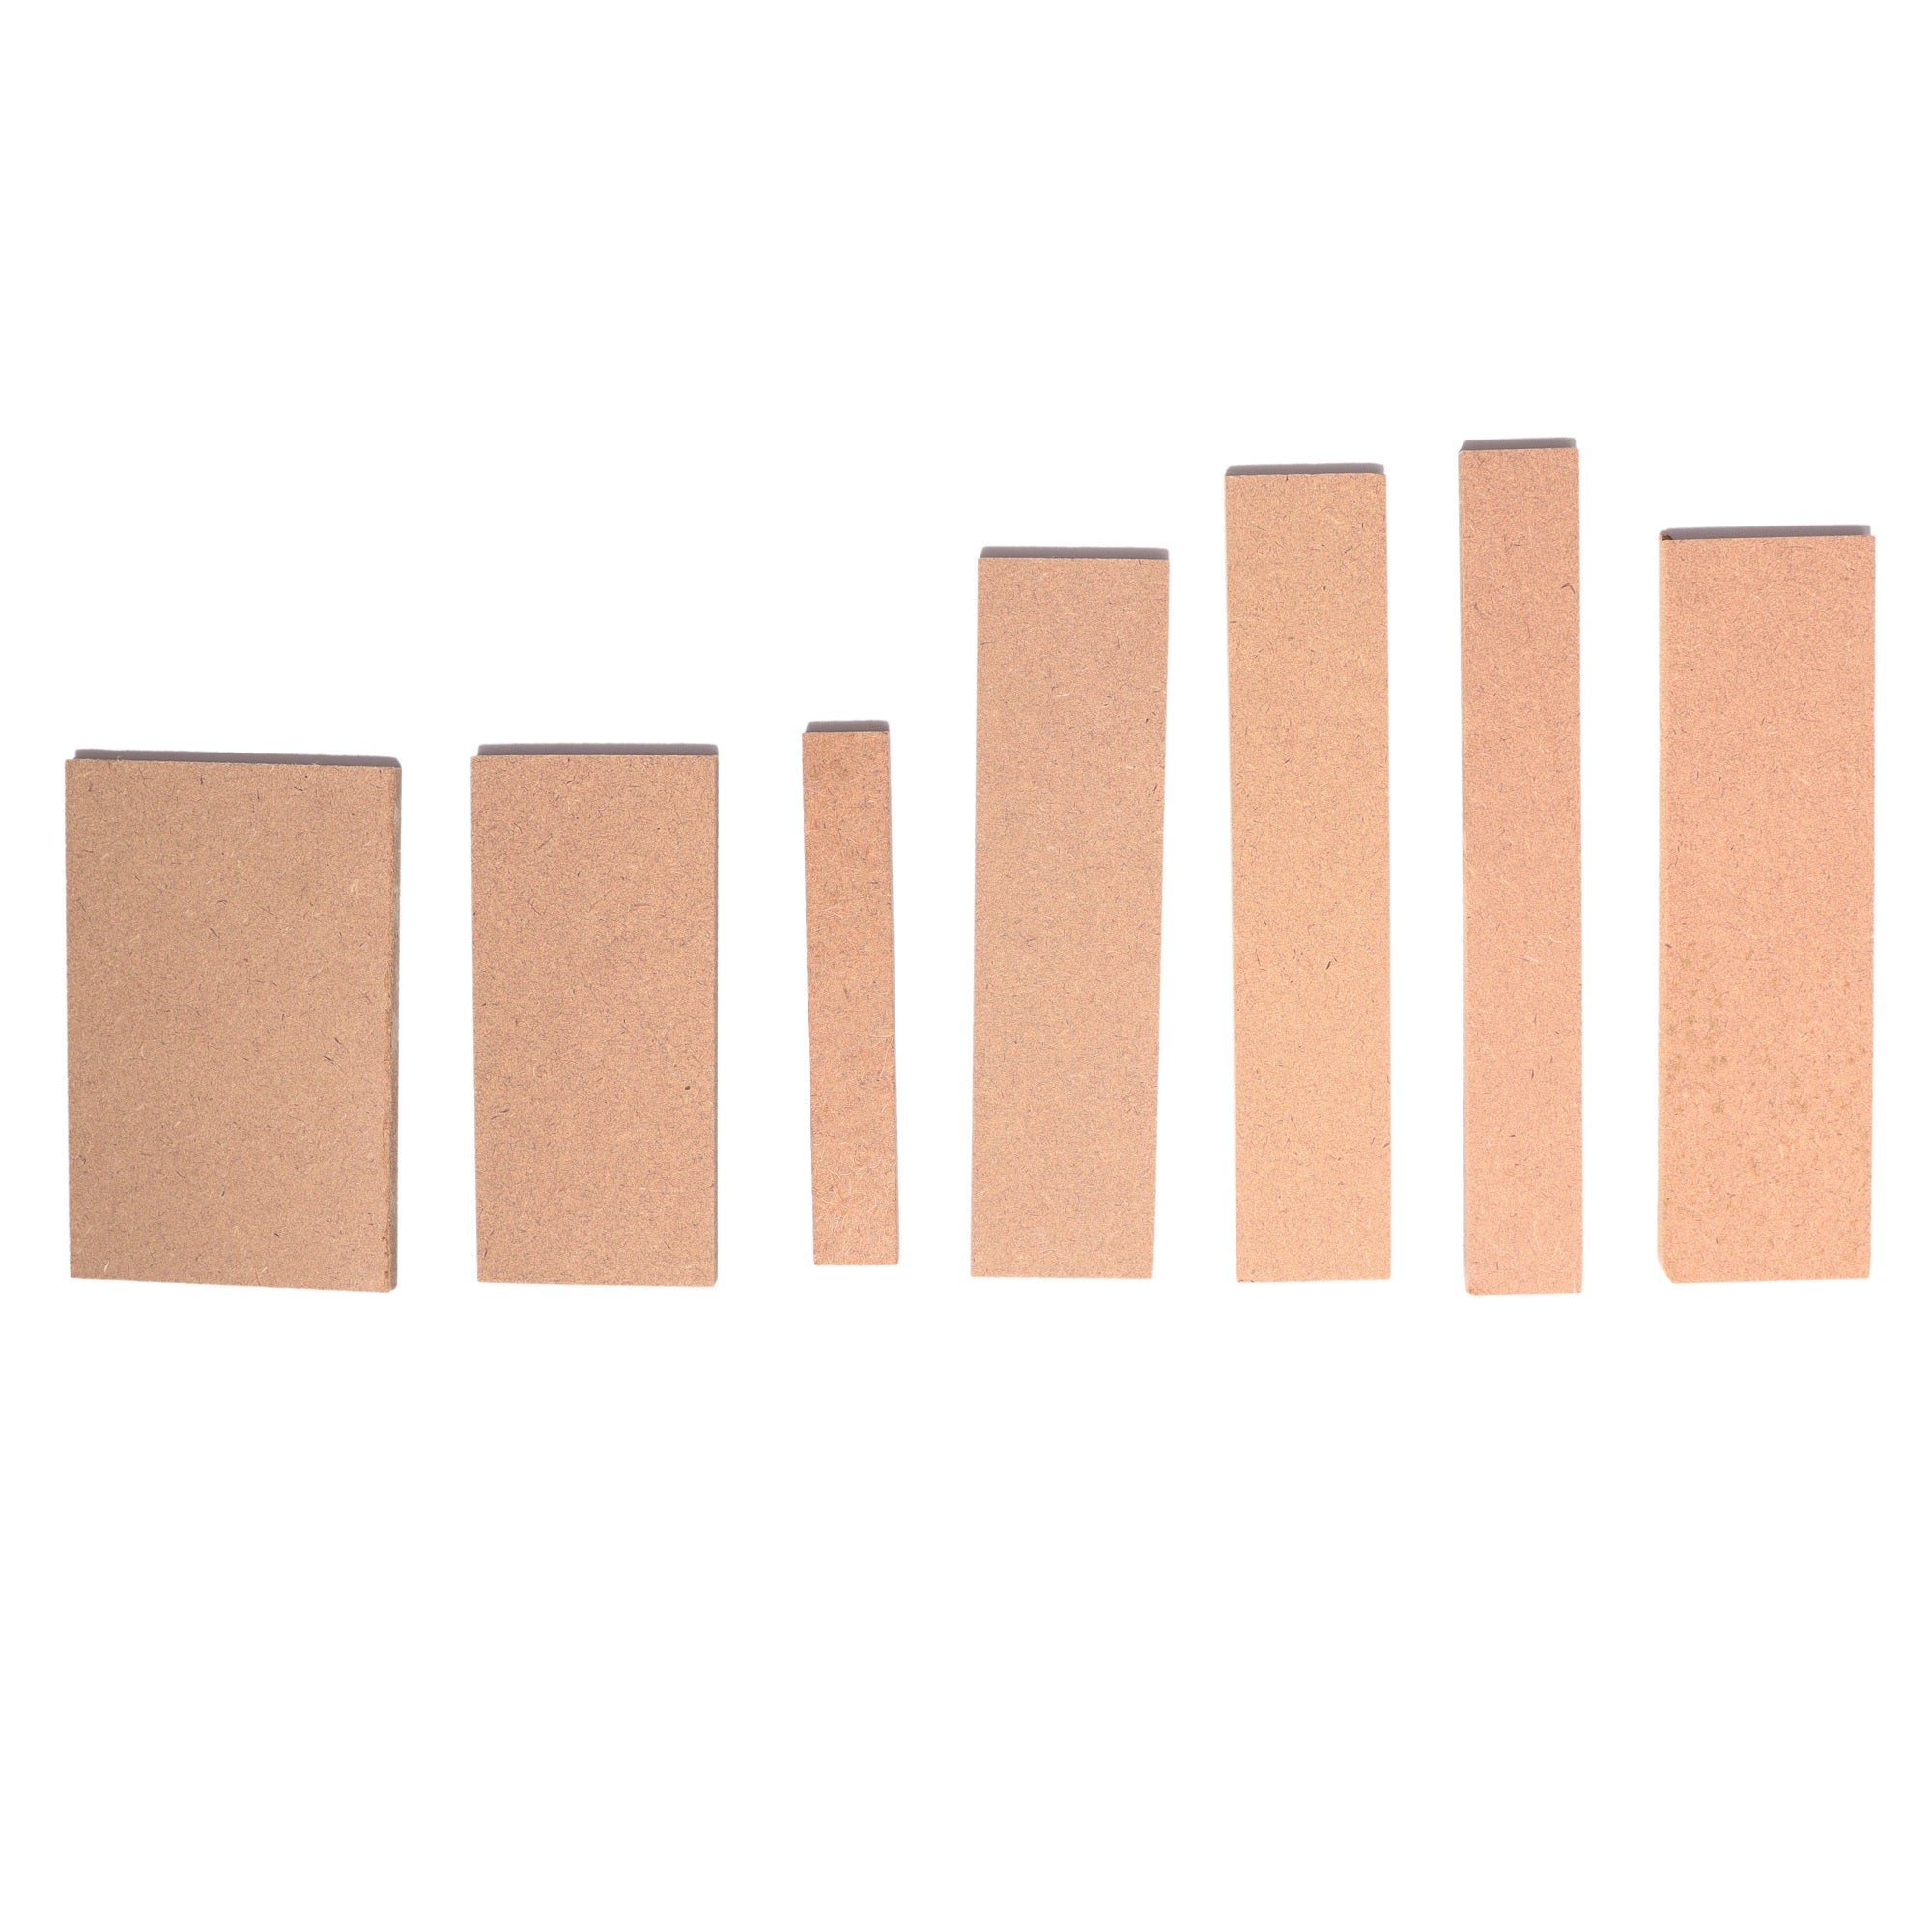 Mdf Shapes Assorted Sizes 5.5Mm Thick 500G Lb